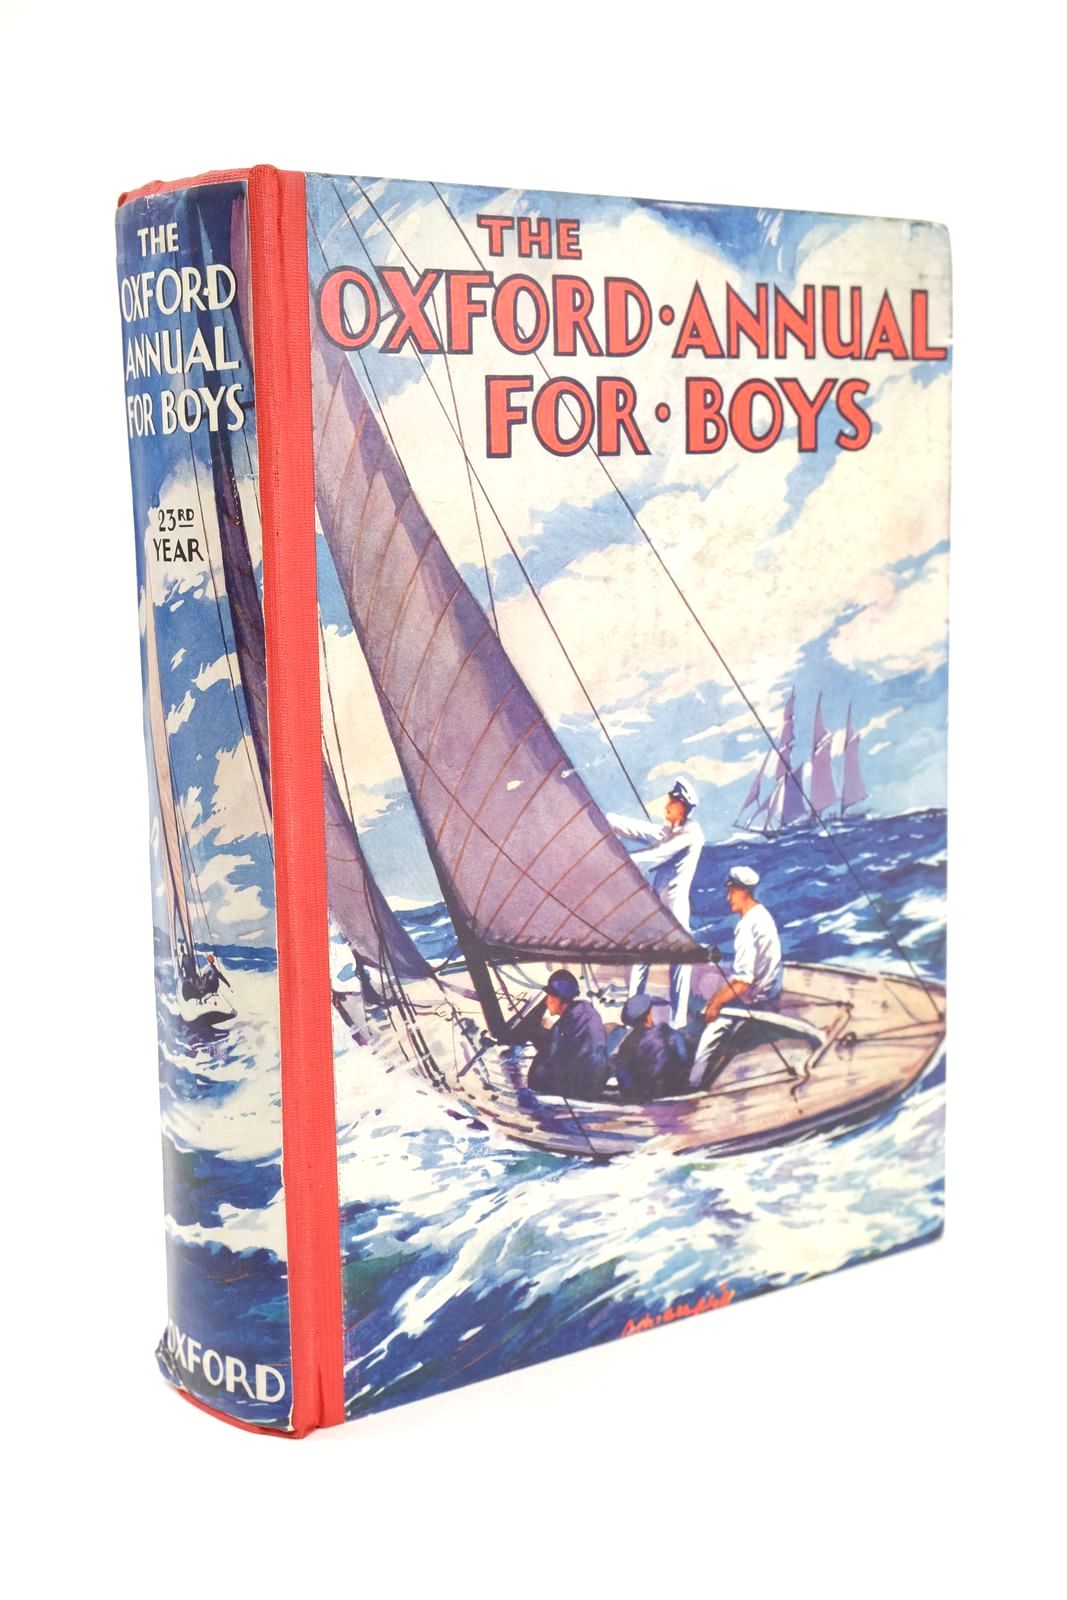 Photo of THE OXFORD ANNUAL FOR BOYS 23RD YEAR written by Strang, Herbert Jordan, Humfrey Hadath, Gunby Brightwell, L.R. et al, illustrated by Sindall, Alfred Foster, Marcia Lane Cuneo, Terence et al., published by Oxford University Press, Humphrey Milford (STOCK CODE: 1324833)  for sale by Stella & Rose's Books